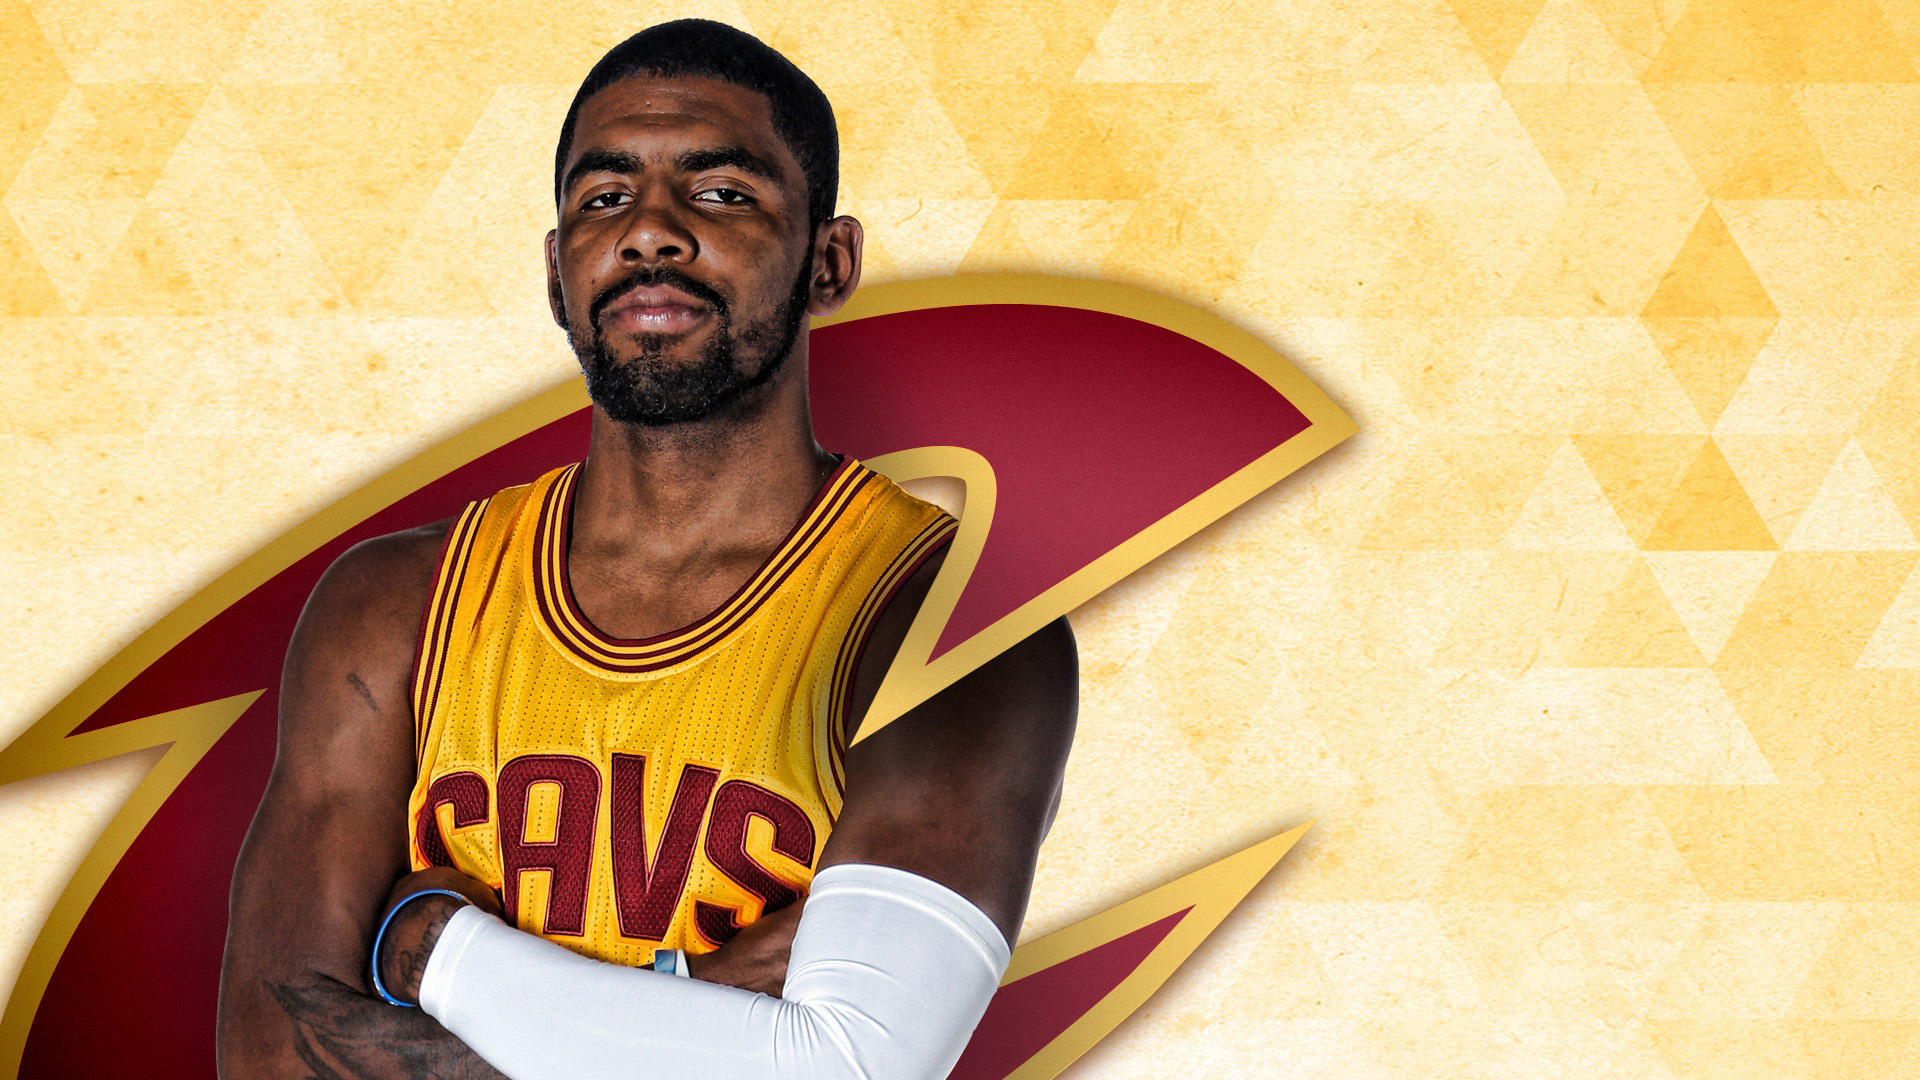 Kyrie Irving Wallpaper Image Photos Pictures Background